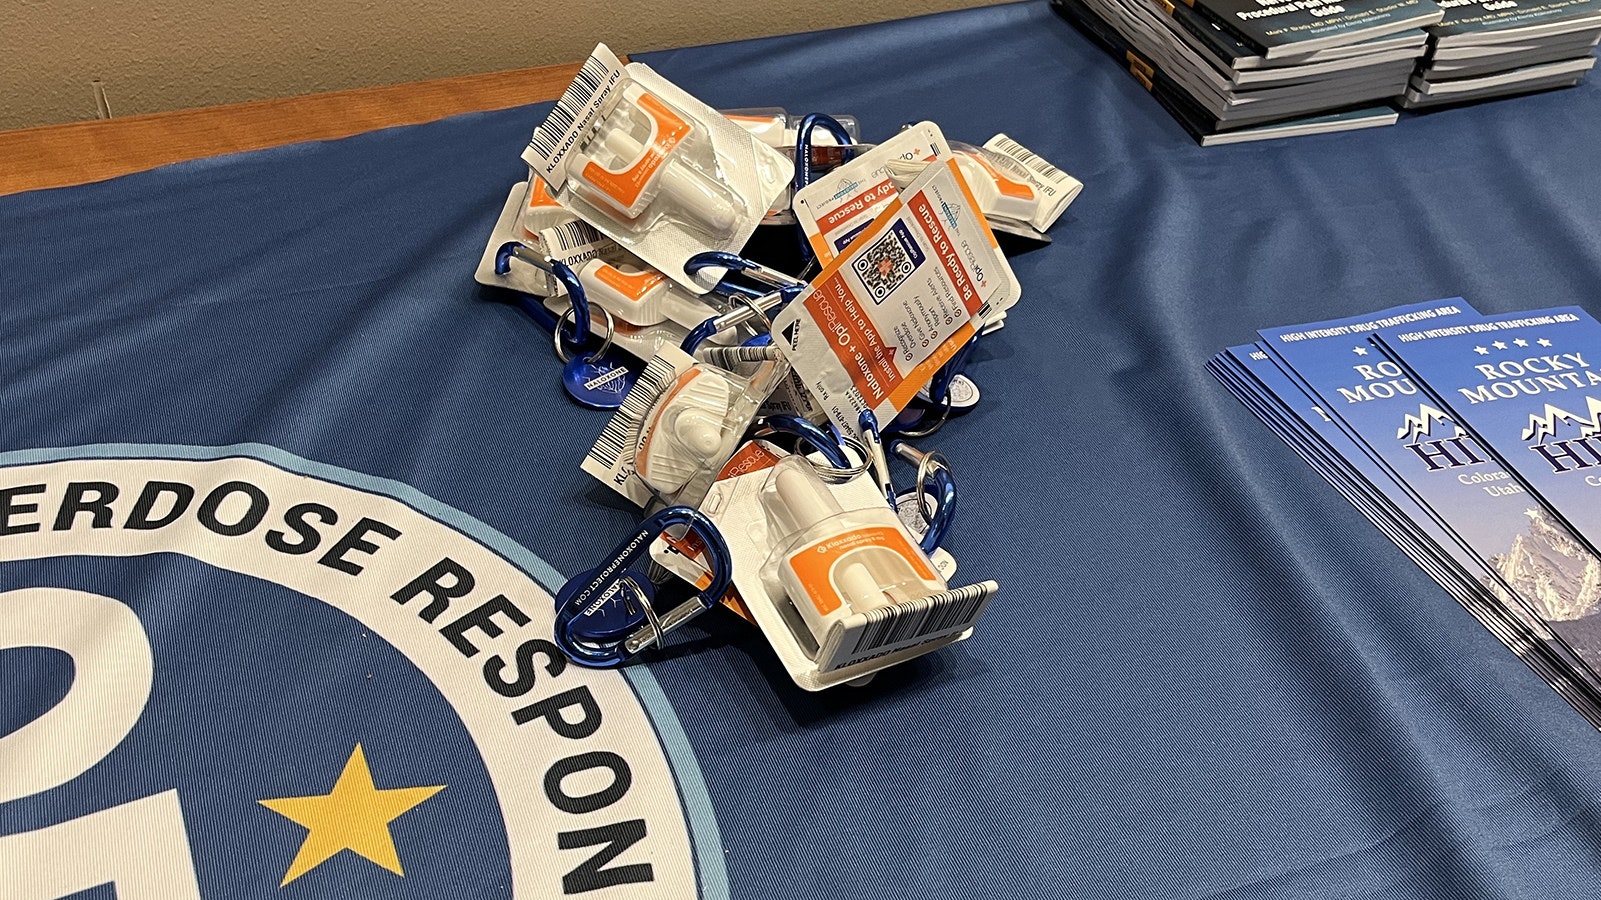 Along with other literature, doses of Naloxone were available to pick up at the Drug Information Opportunity Symposium at the Wyoming Capitol on Thursday. Naloxone is used to counter opioid overdoses.